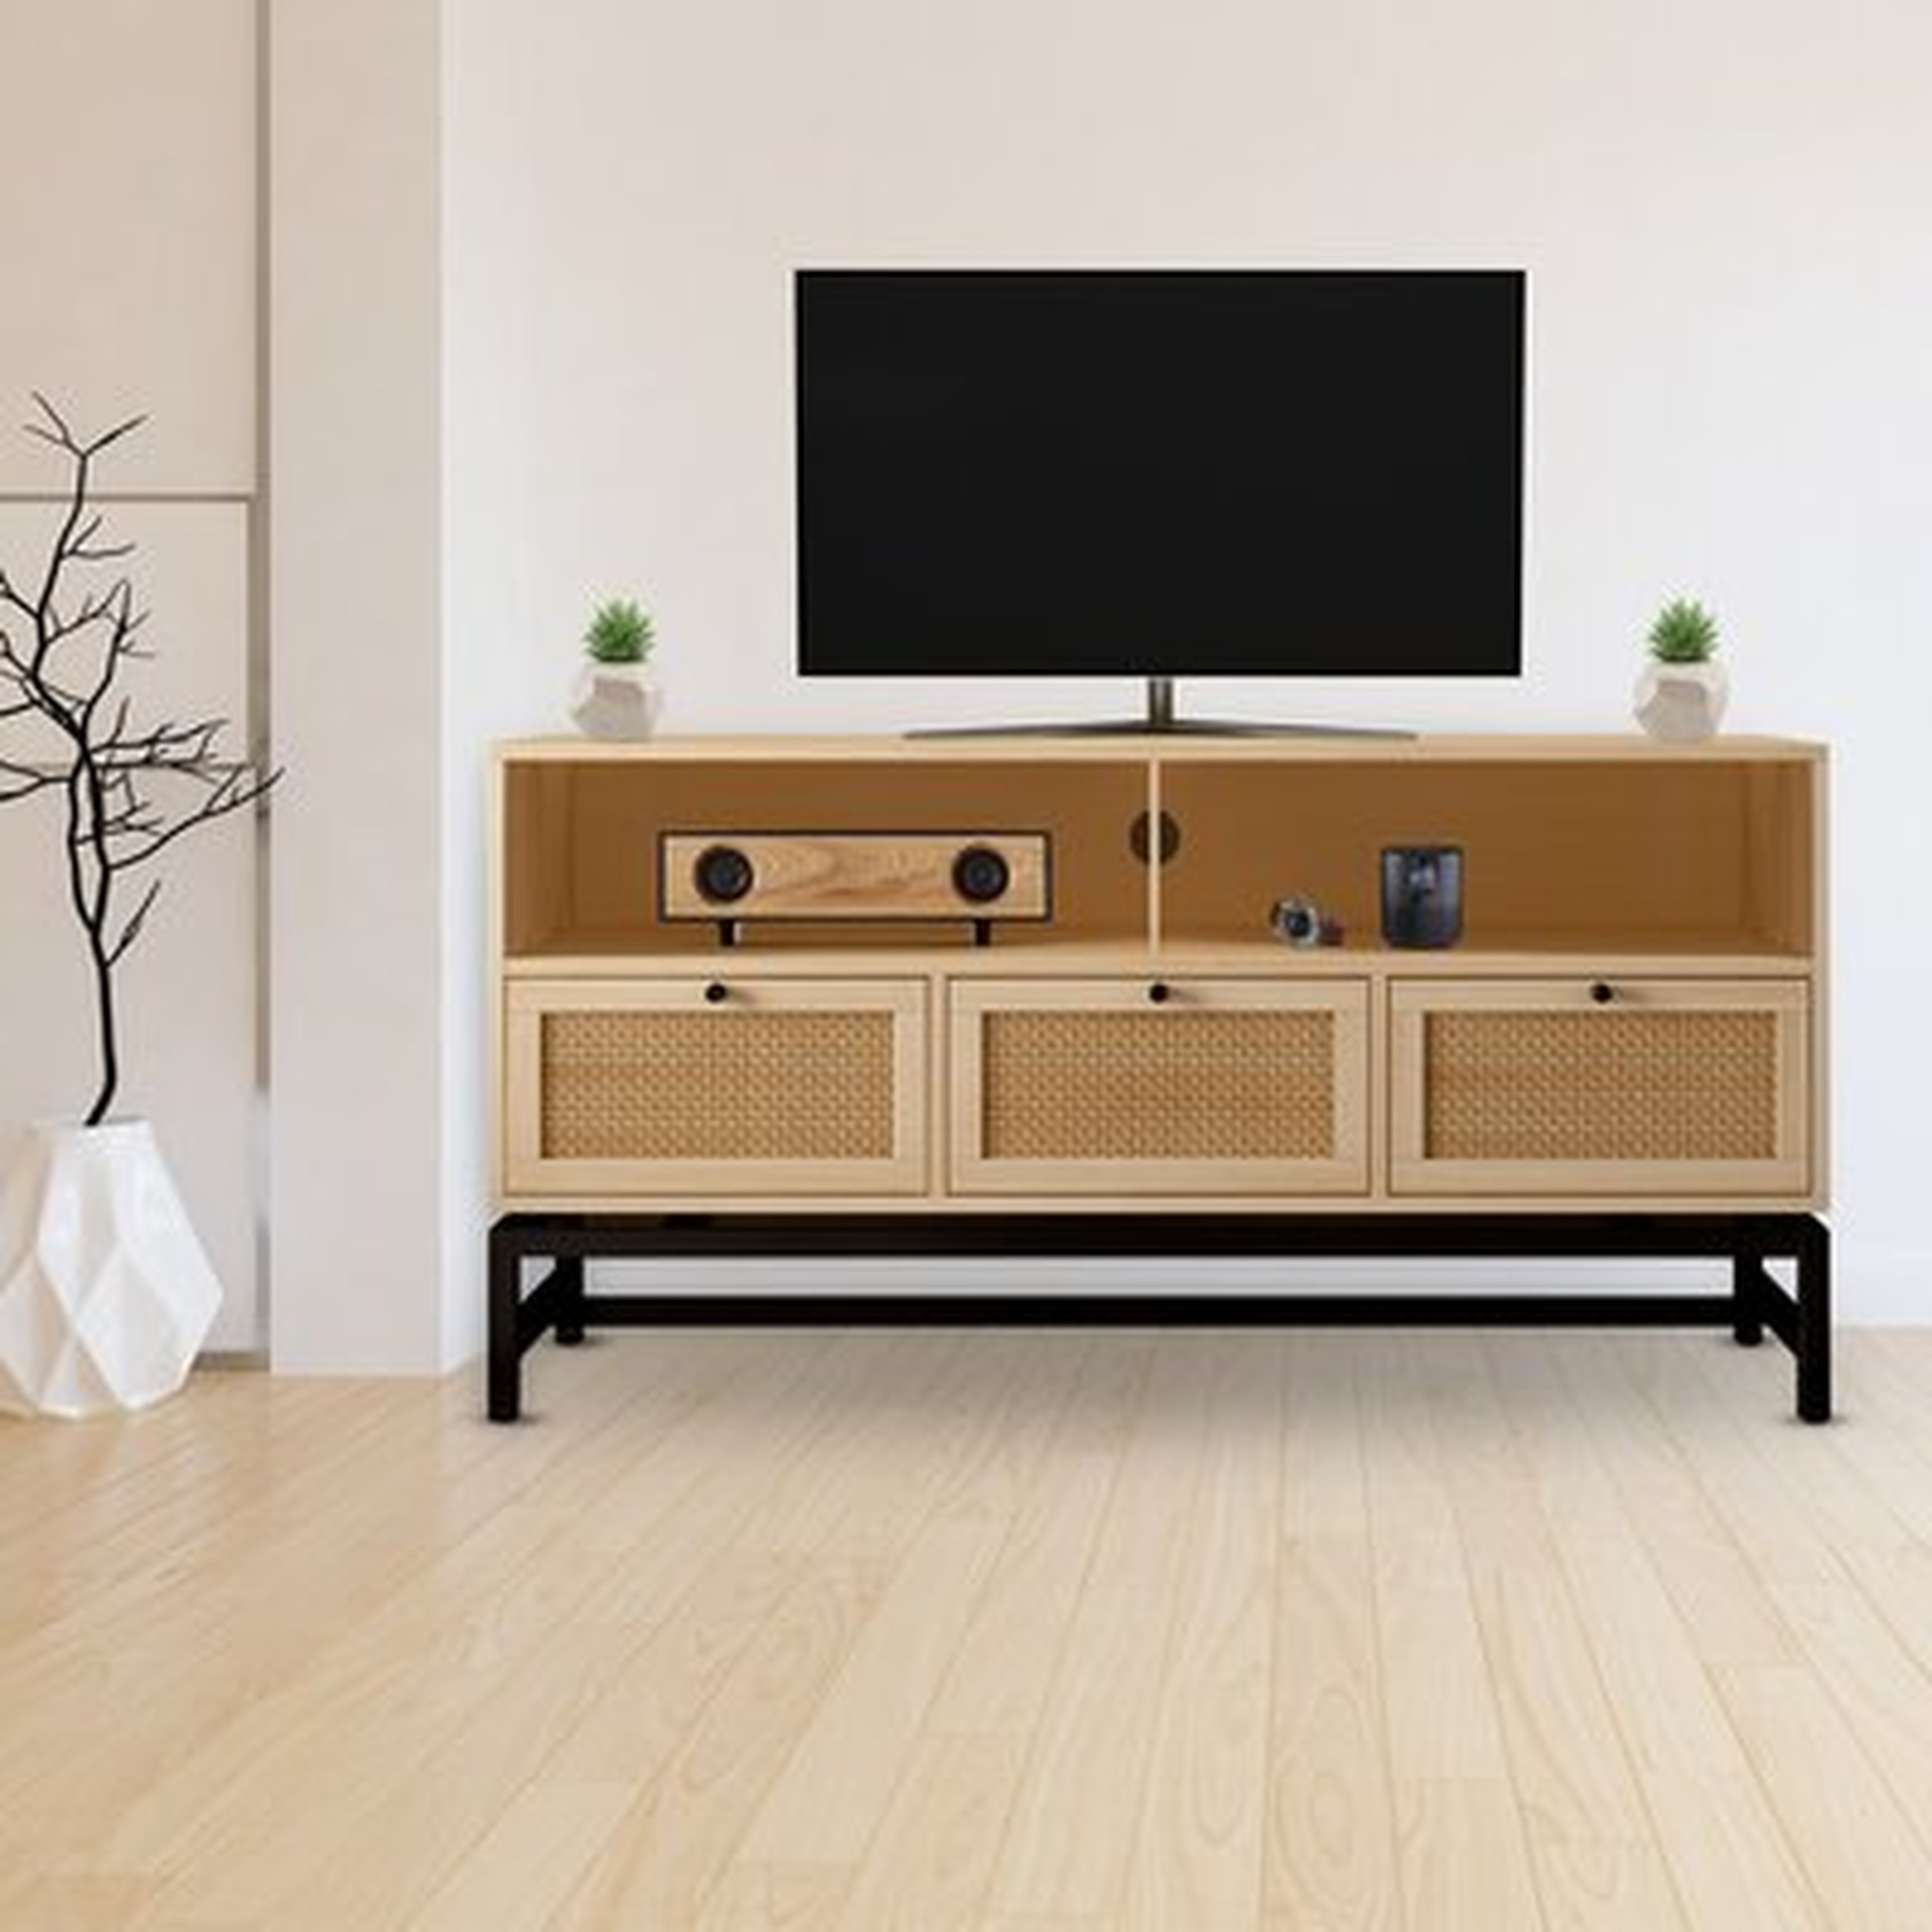 Sproul TV Stand for TVs up to 43" - Wayfair